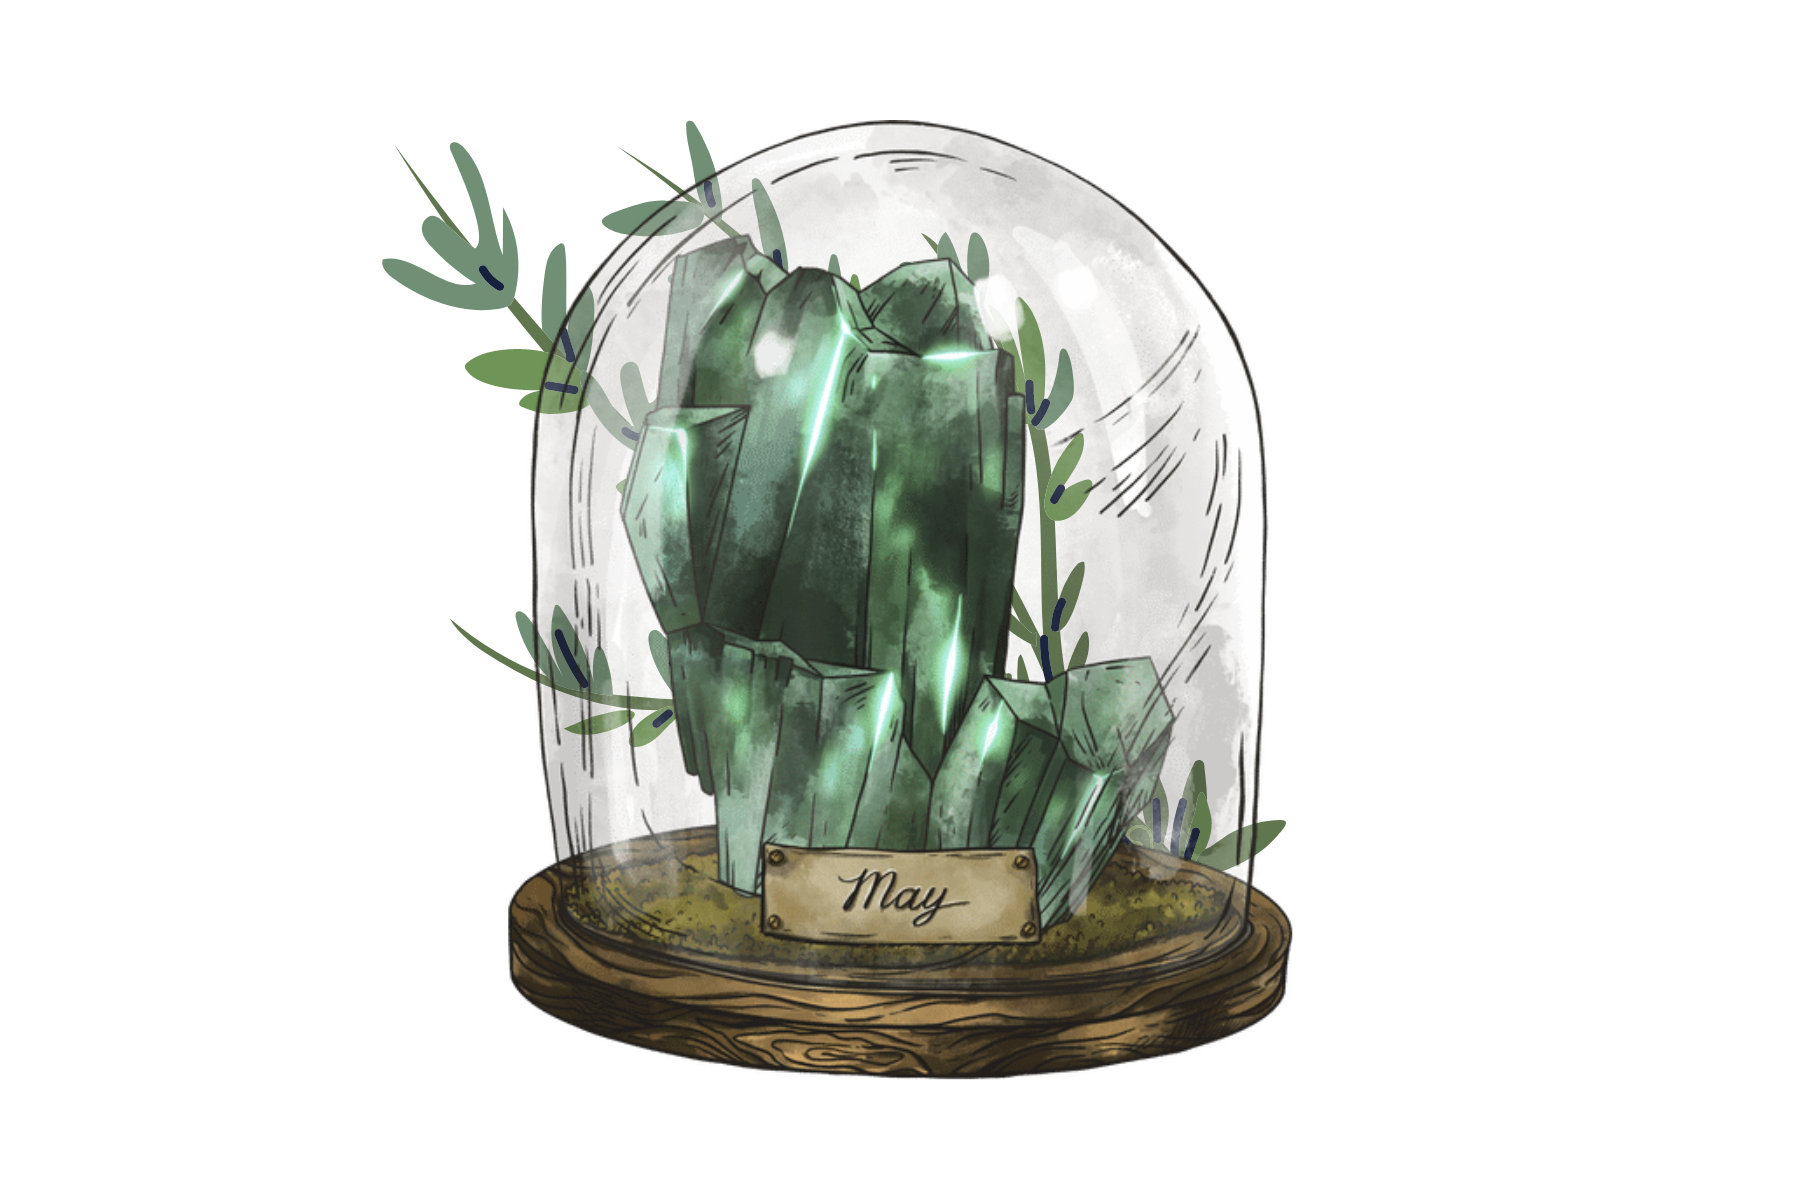 Emerald in a glass jar with leaves on the outside